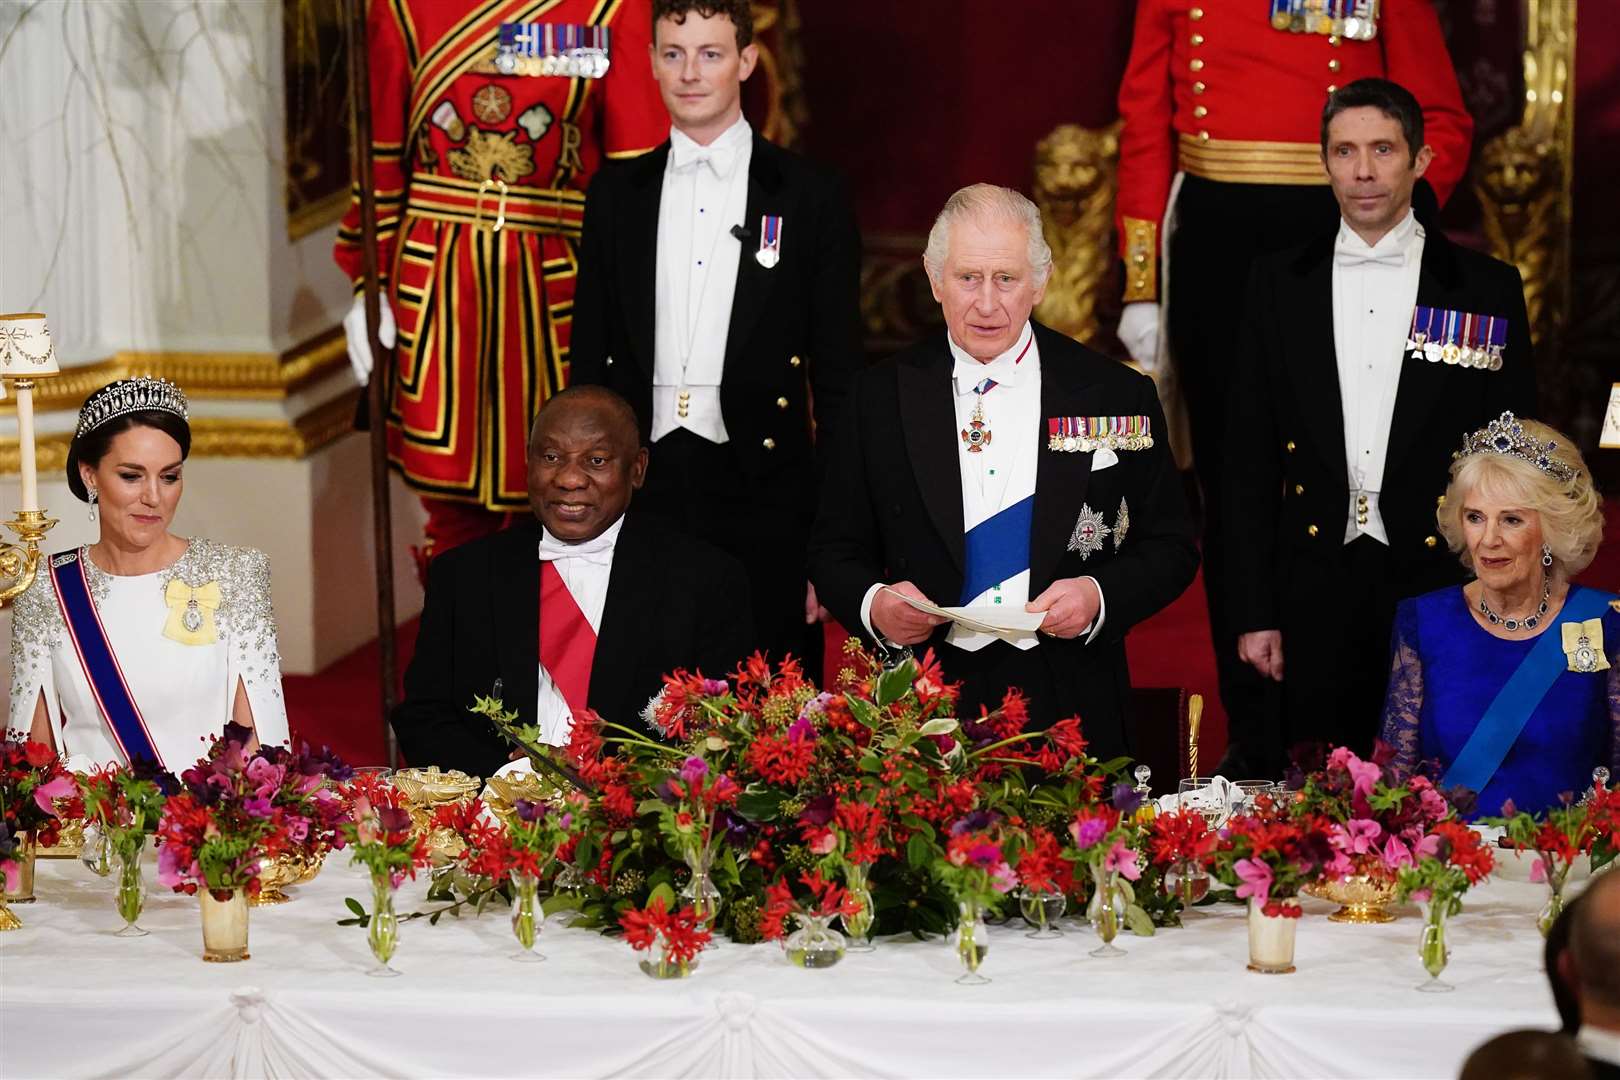 The Princess of Wales, President Cyril Ramaphosa of South Africa, the King and Queen during the state banquet at Buckingham Palace (Aaron Chown/PA)